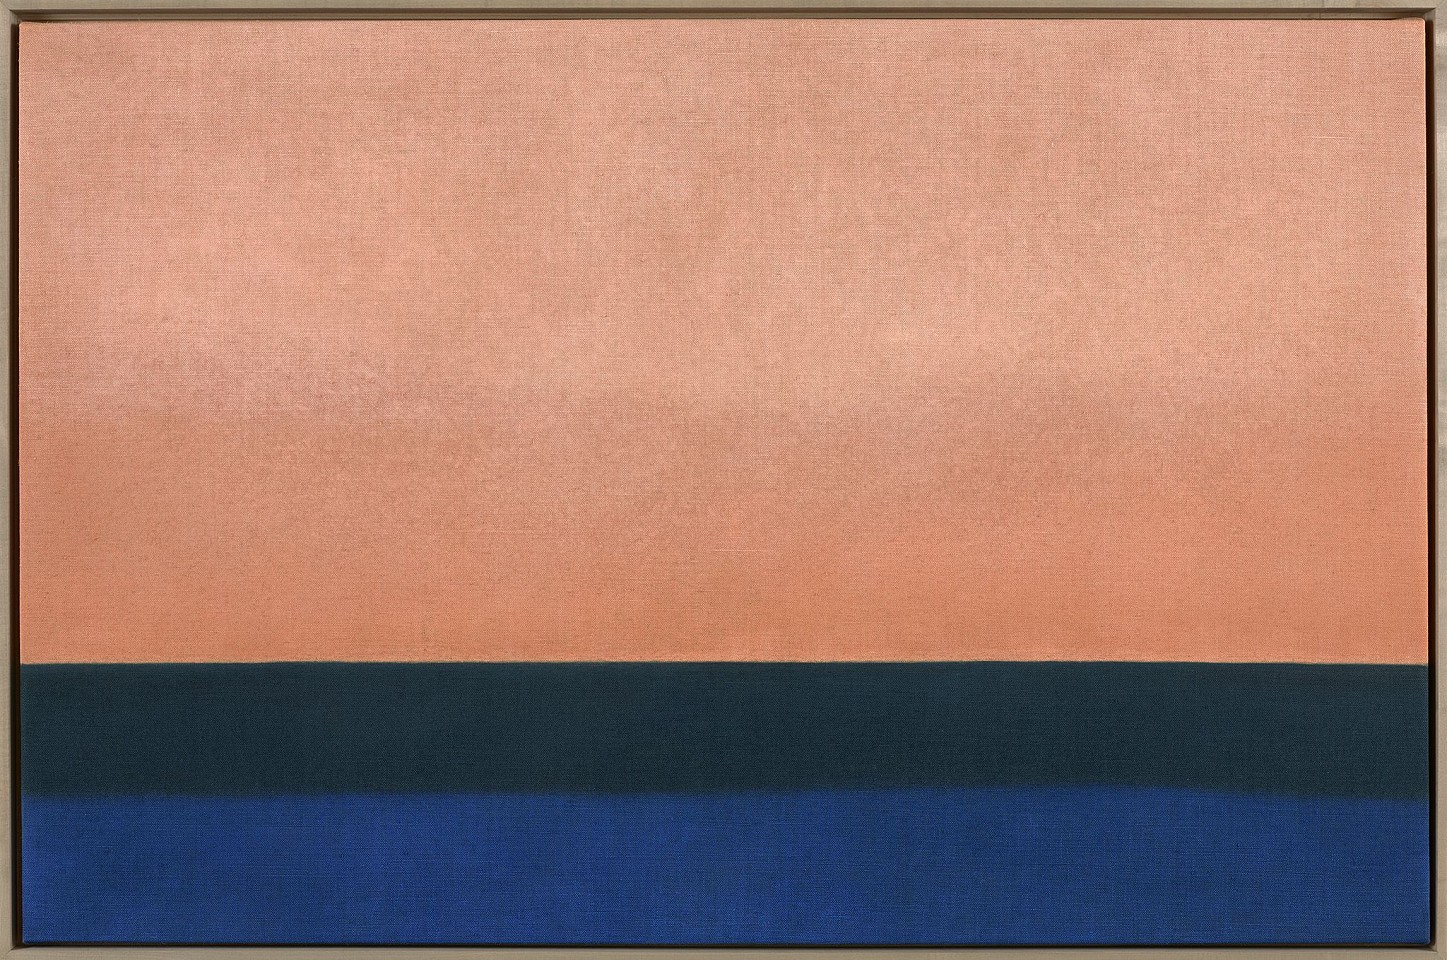 Susan Vecsey, Untitled (Coral / Indigo) | SOLD, 2022
Oil on linen, 38 x 58 in. (96.5 x 147.3 cm)
VEC-00233